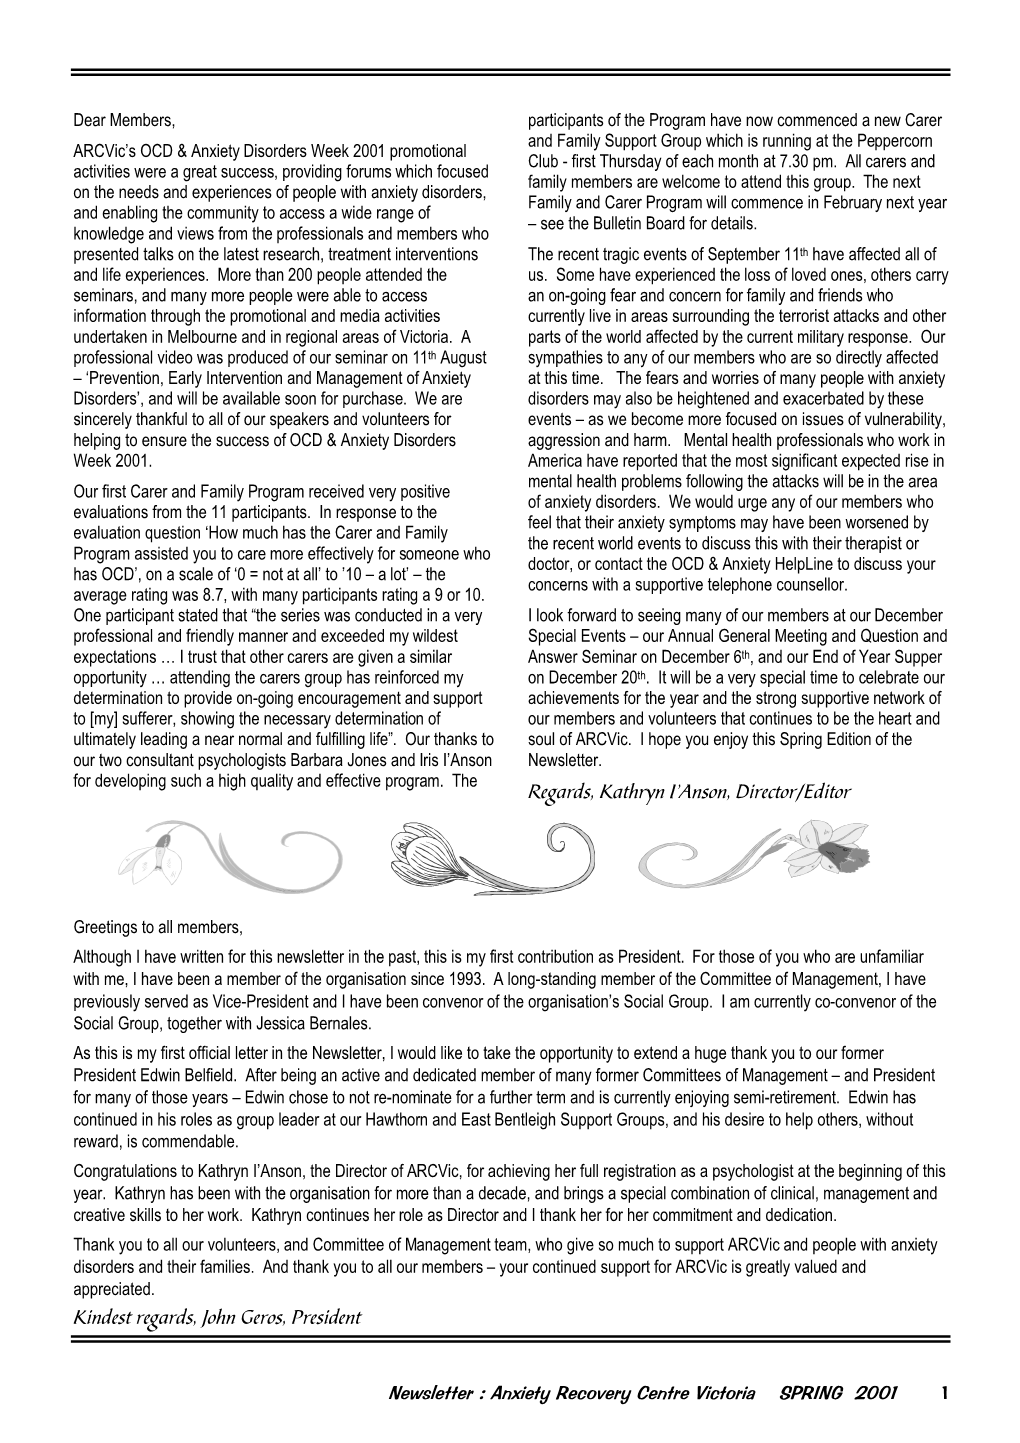 Newsletter : Anxiety Recovery Centre Victoria SPRING 2001 Regards